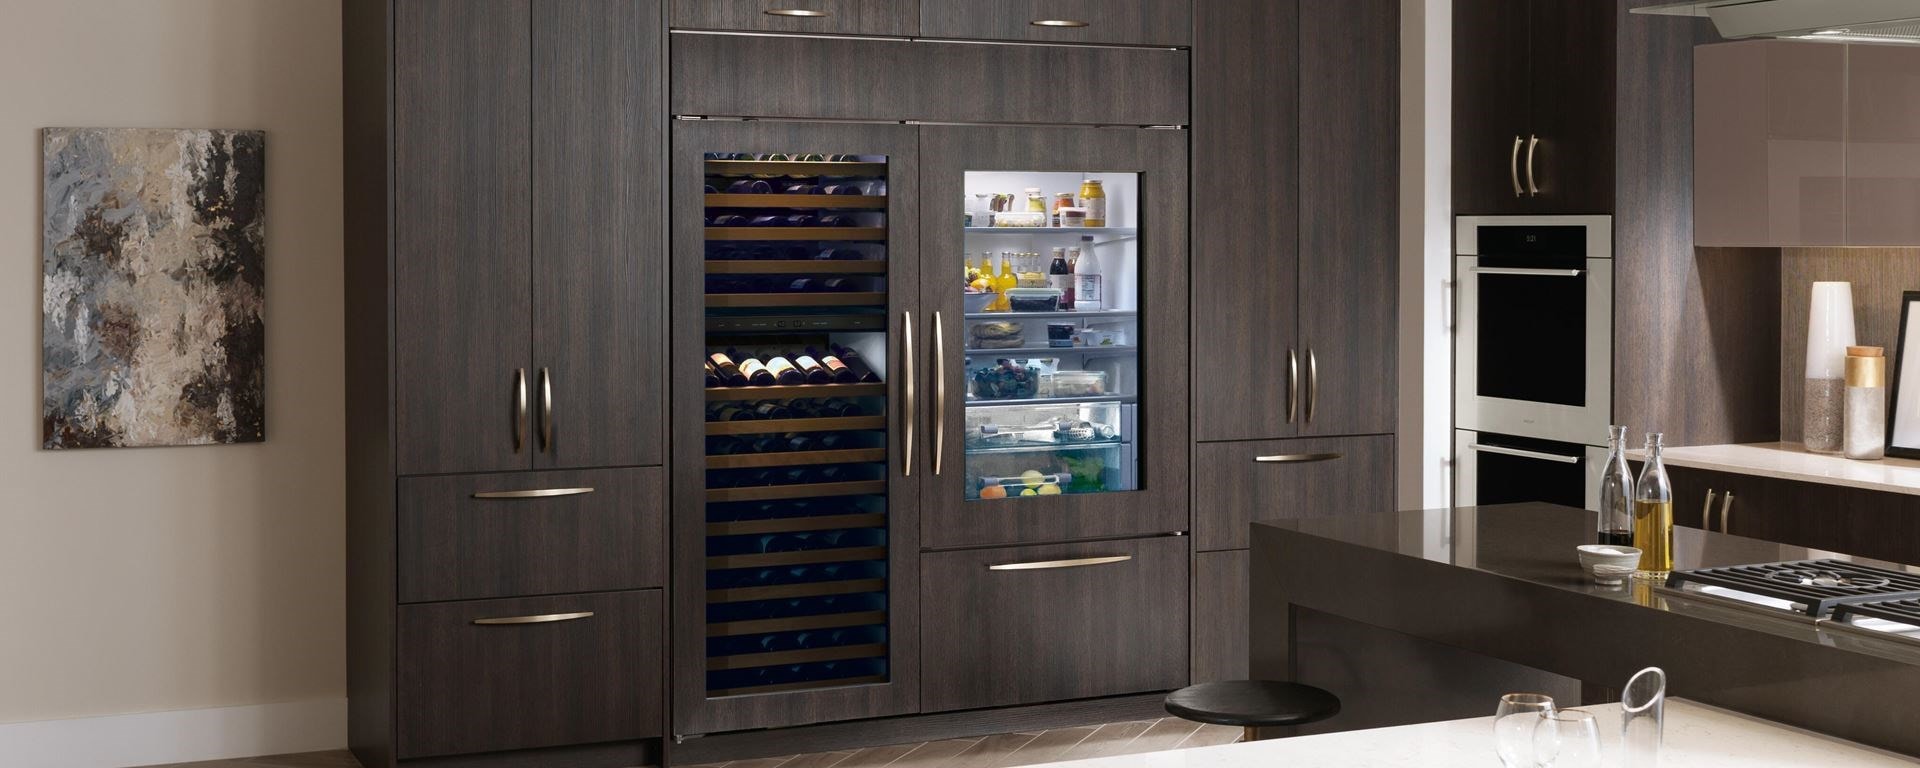 Sub-Zero Classic Series Refrigeration and Wine Storage, paired with Wolf Cooktop, Oven and Ventilation